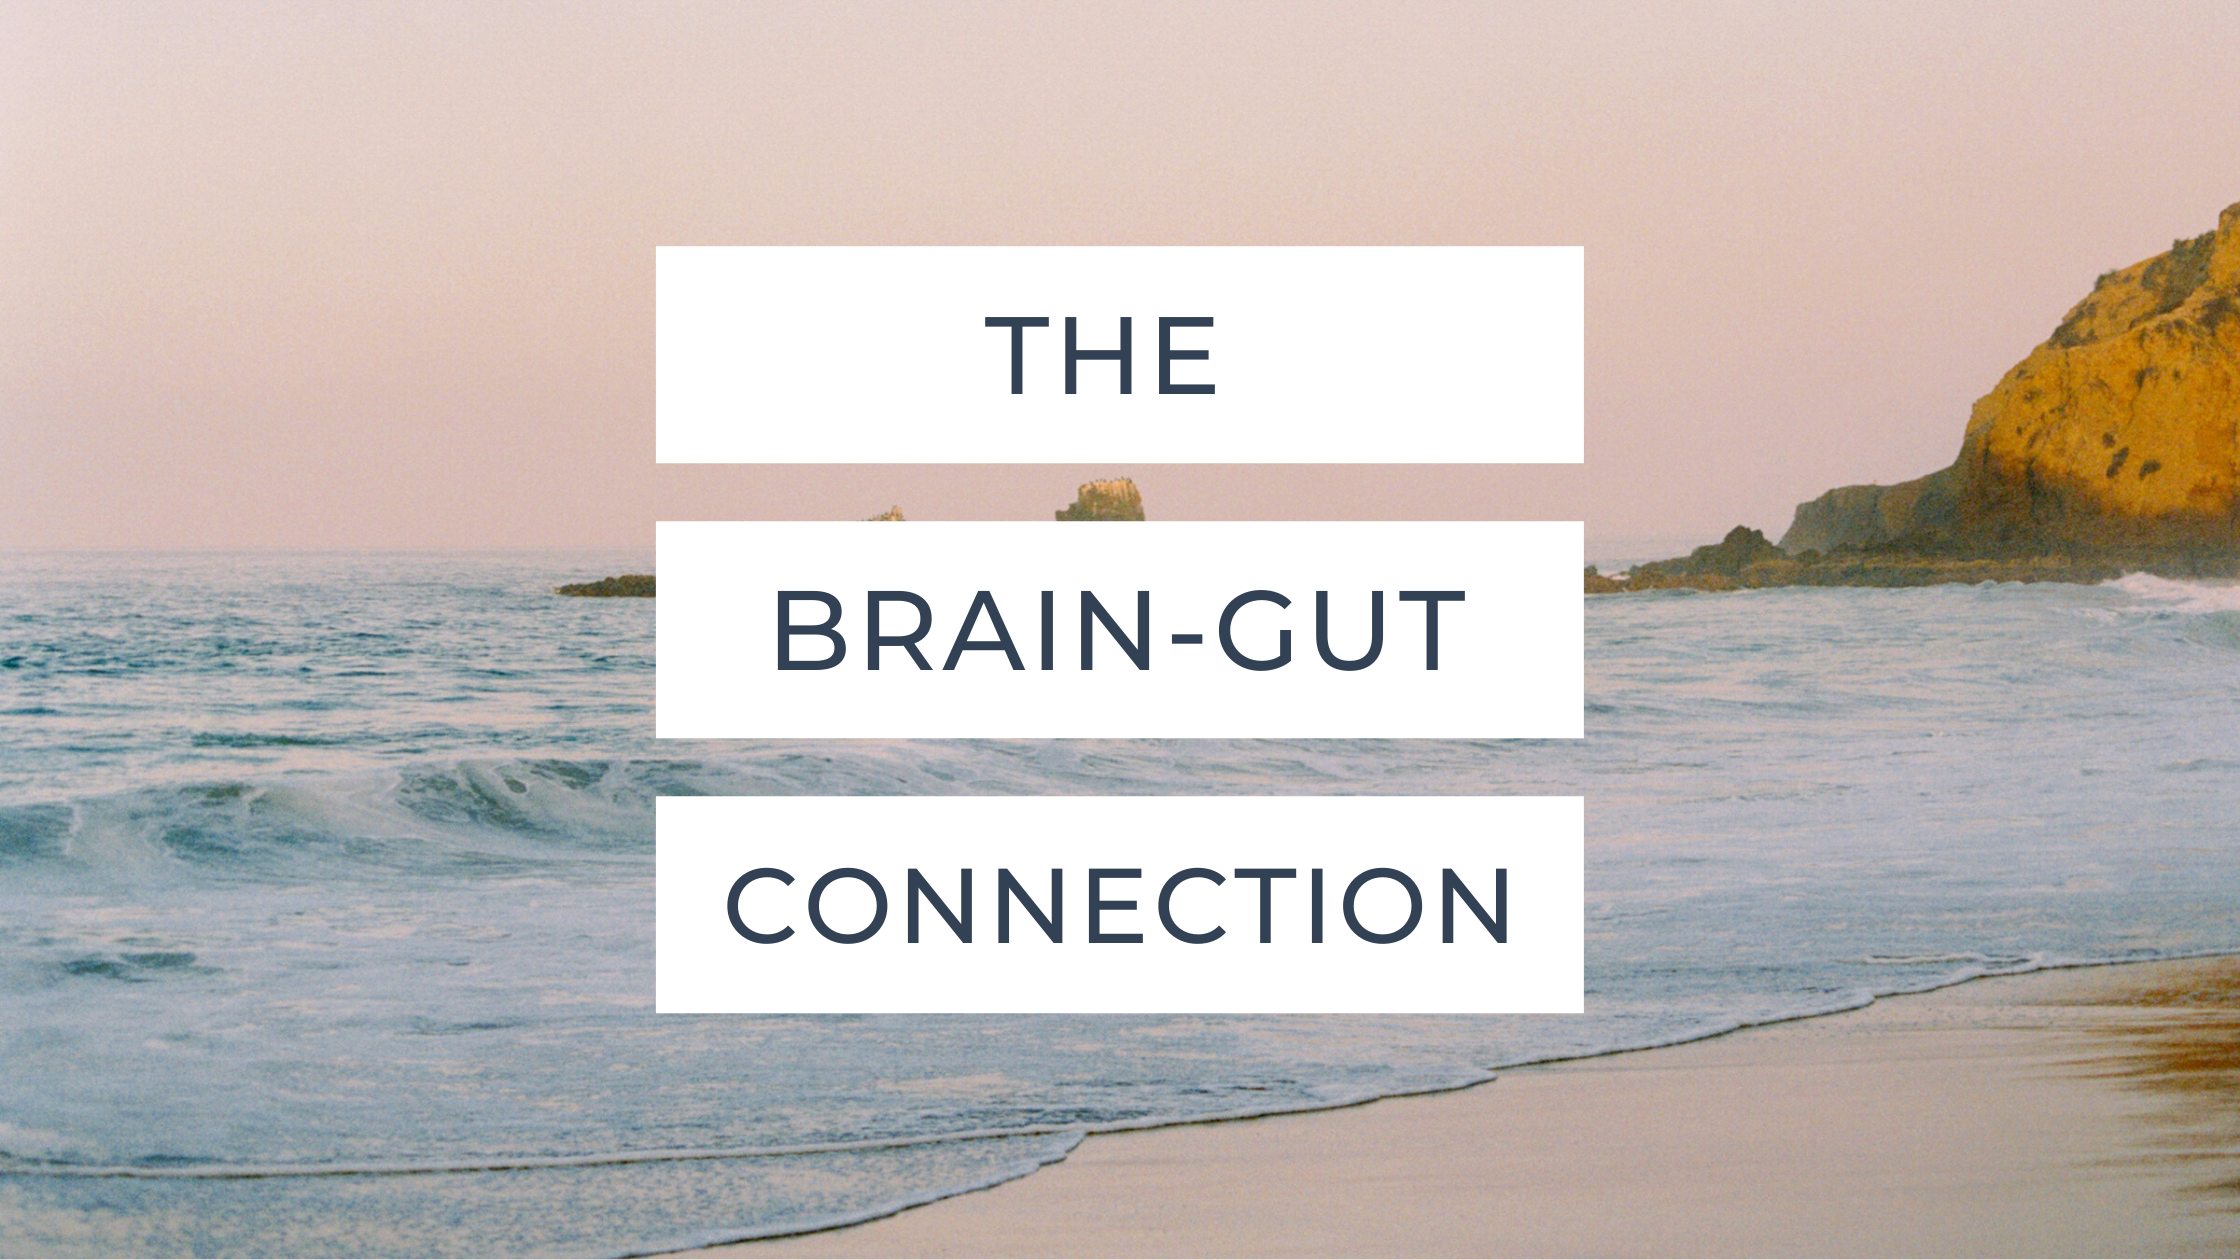 The brain-gut connection